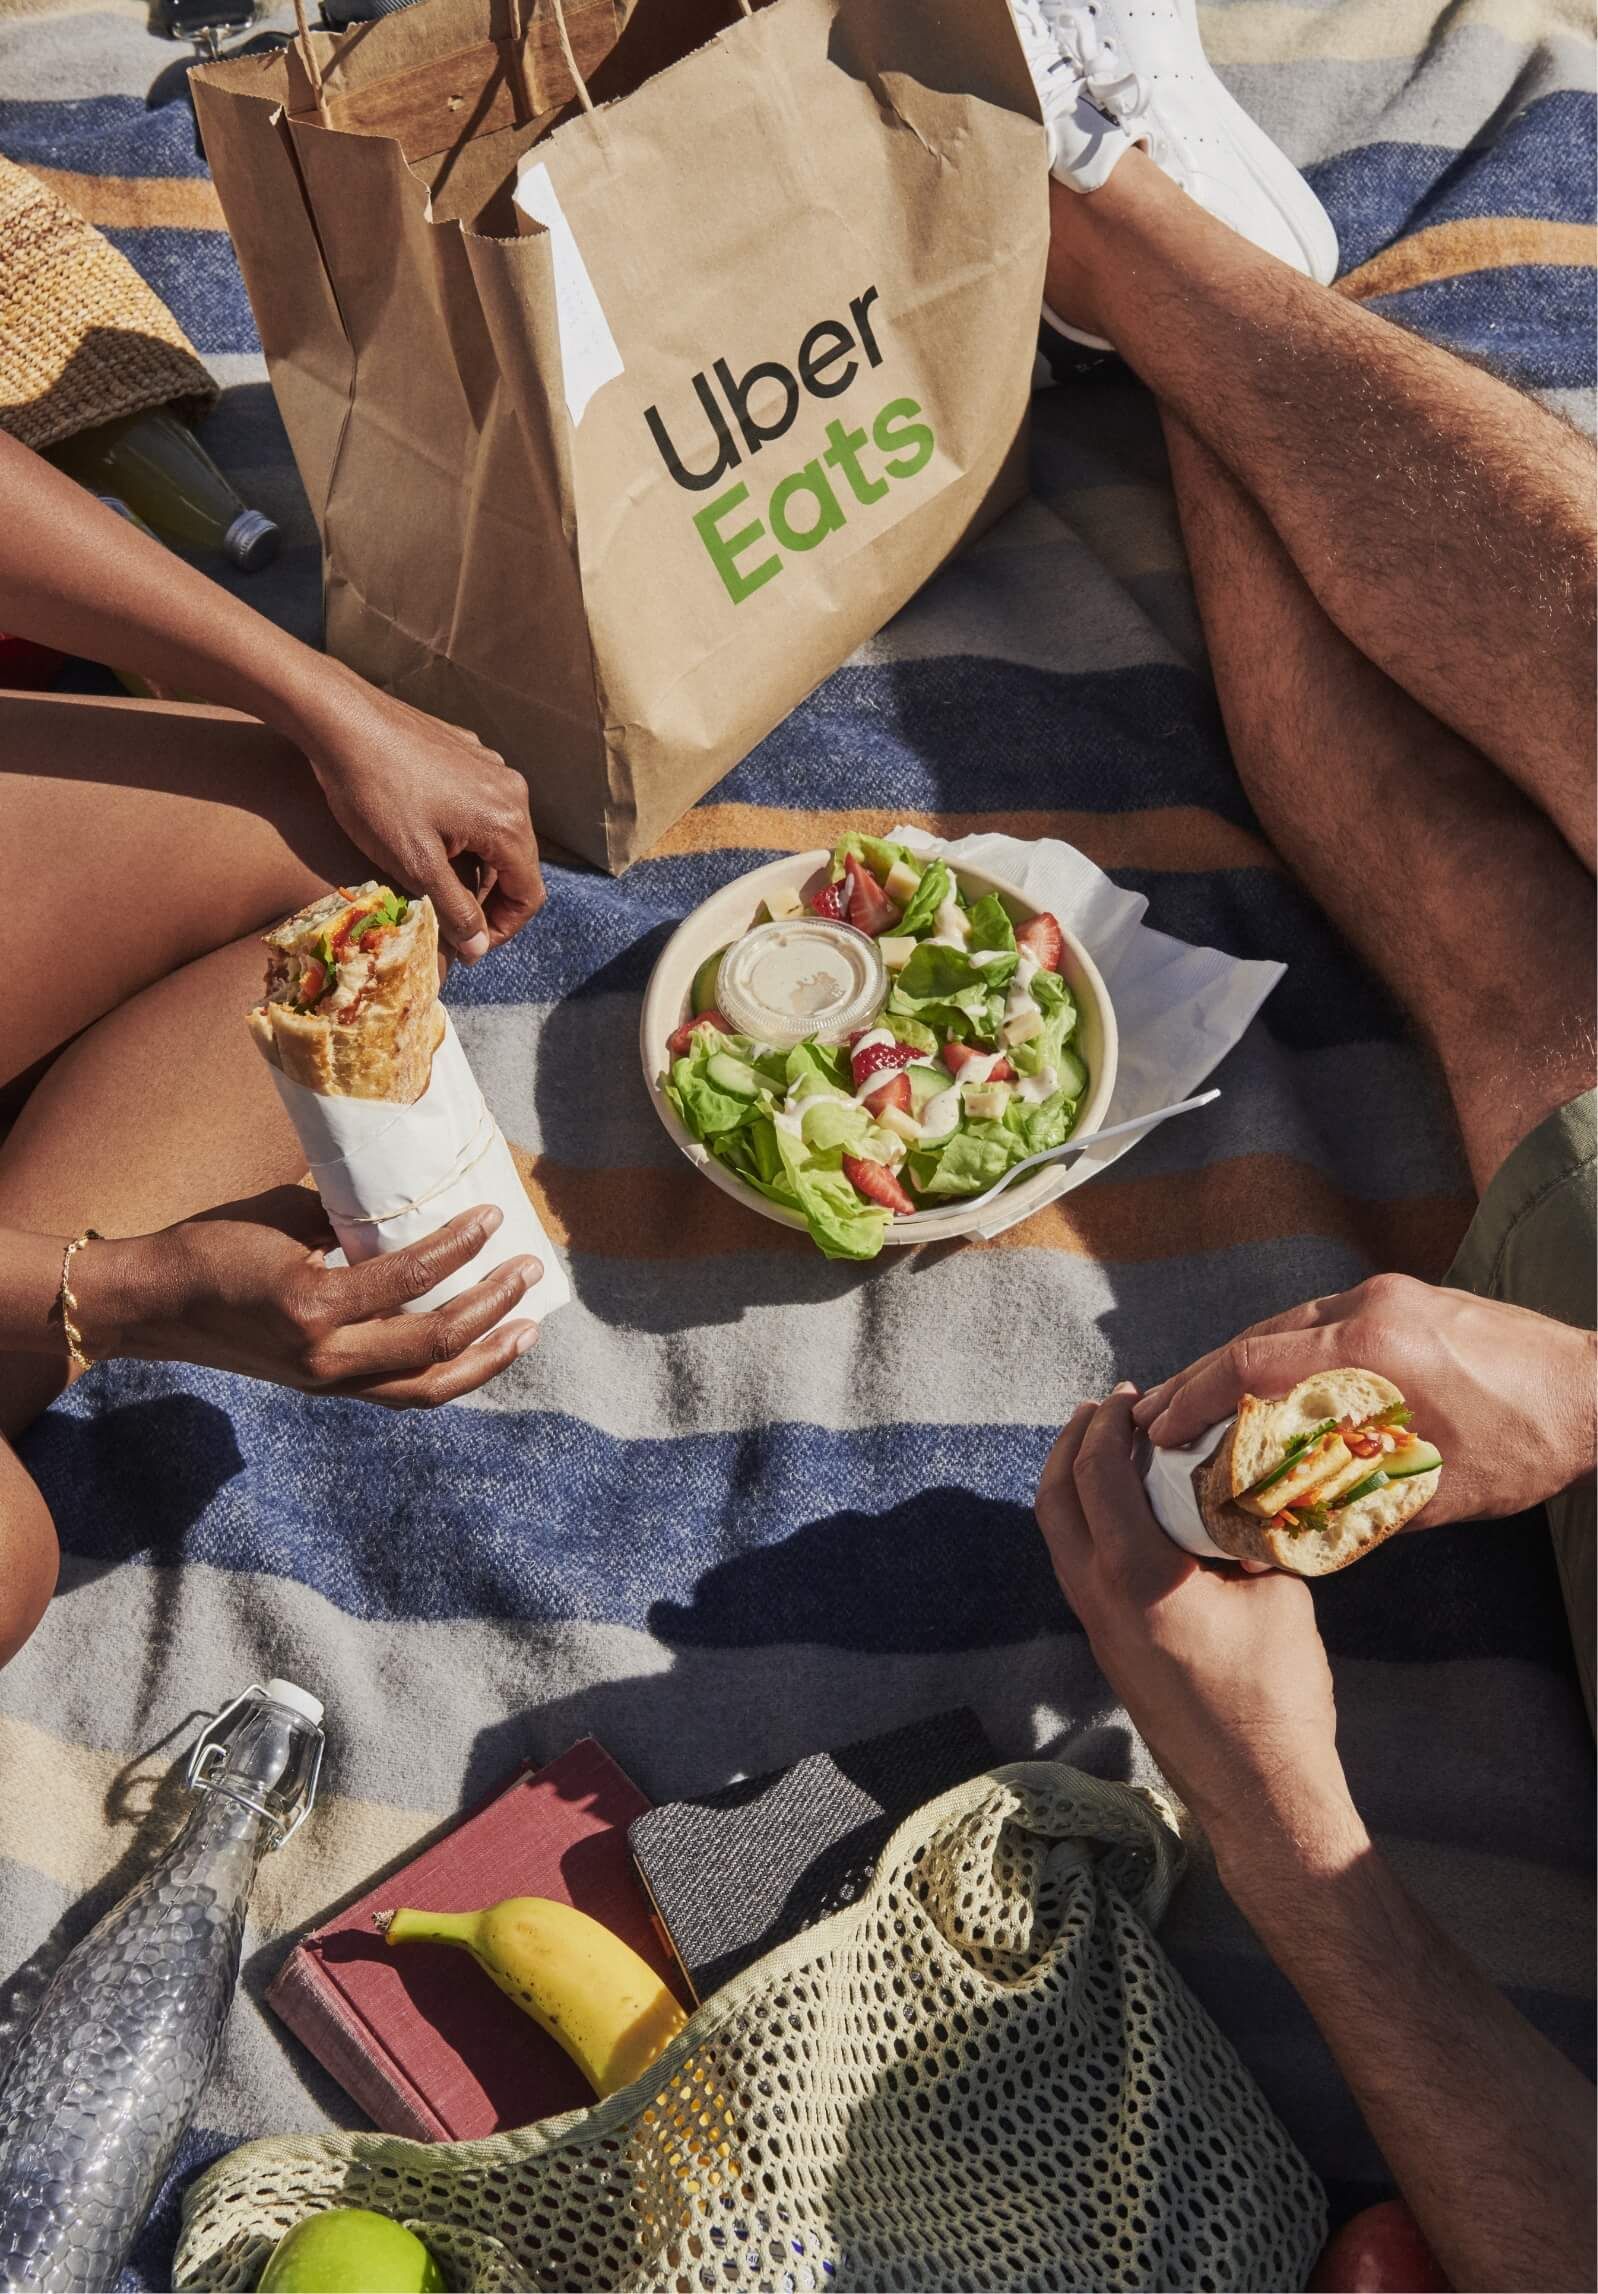 couple on blanket on eating takeout sandwiches and salad from Uber Eats